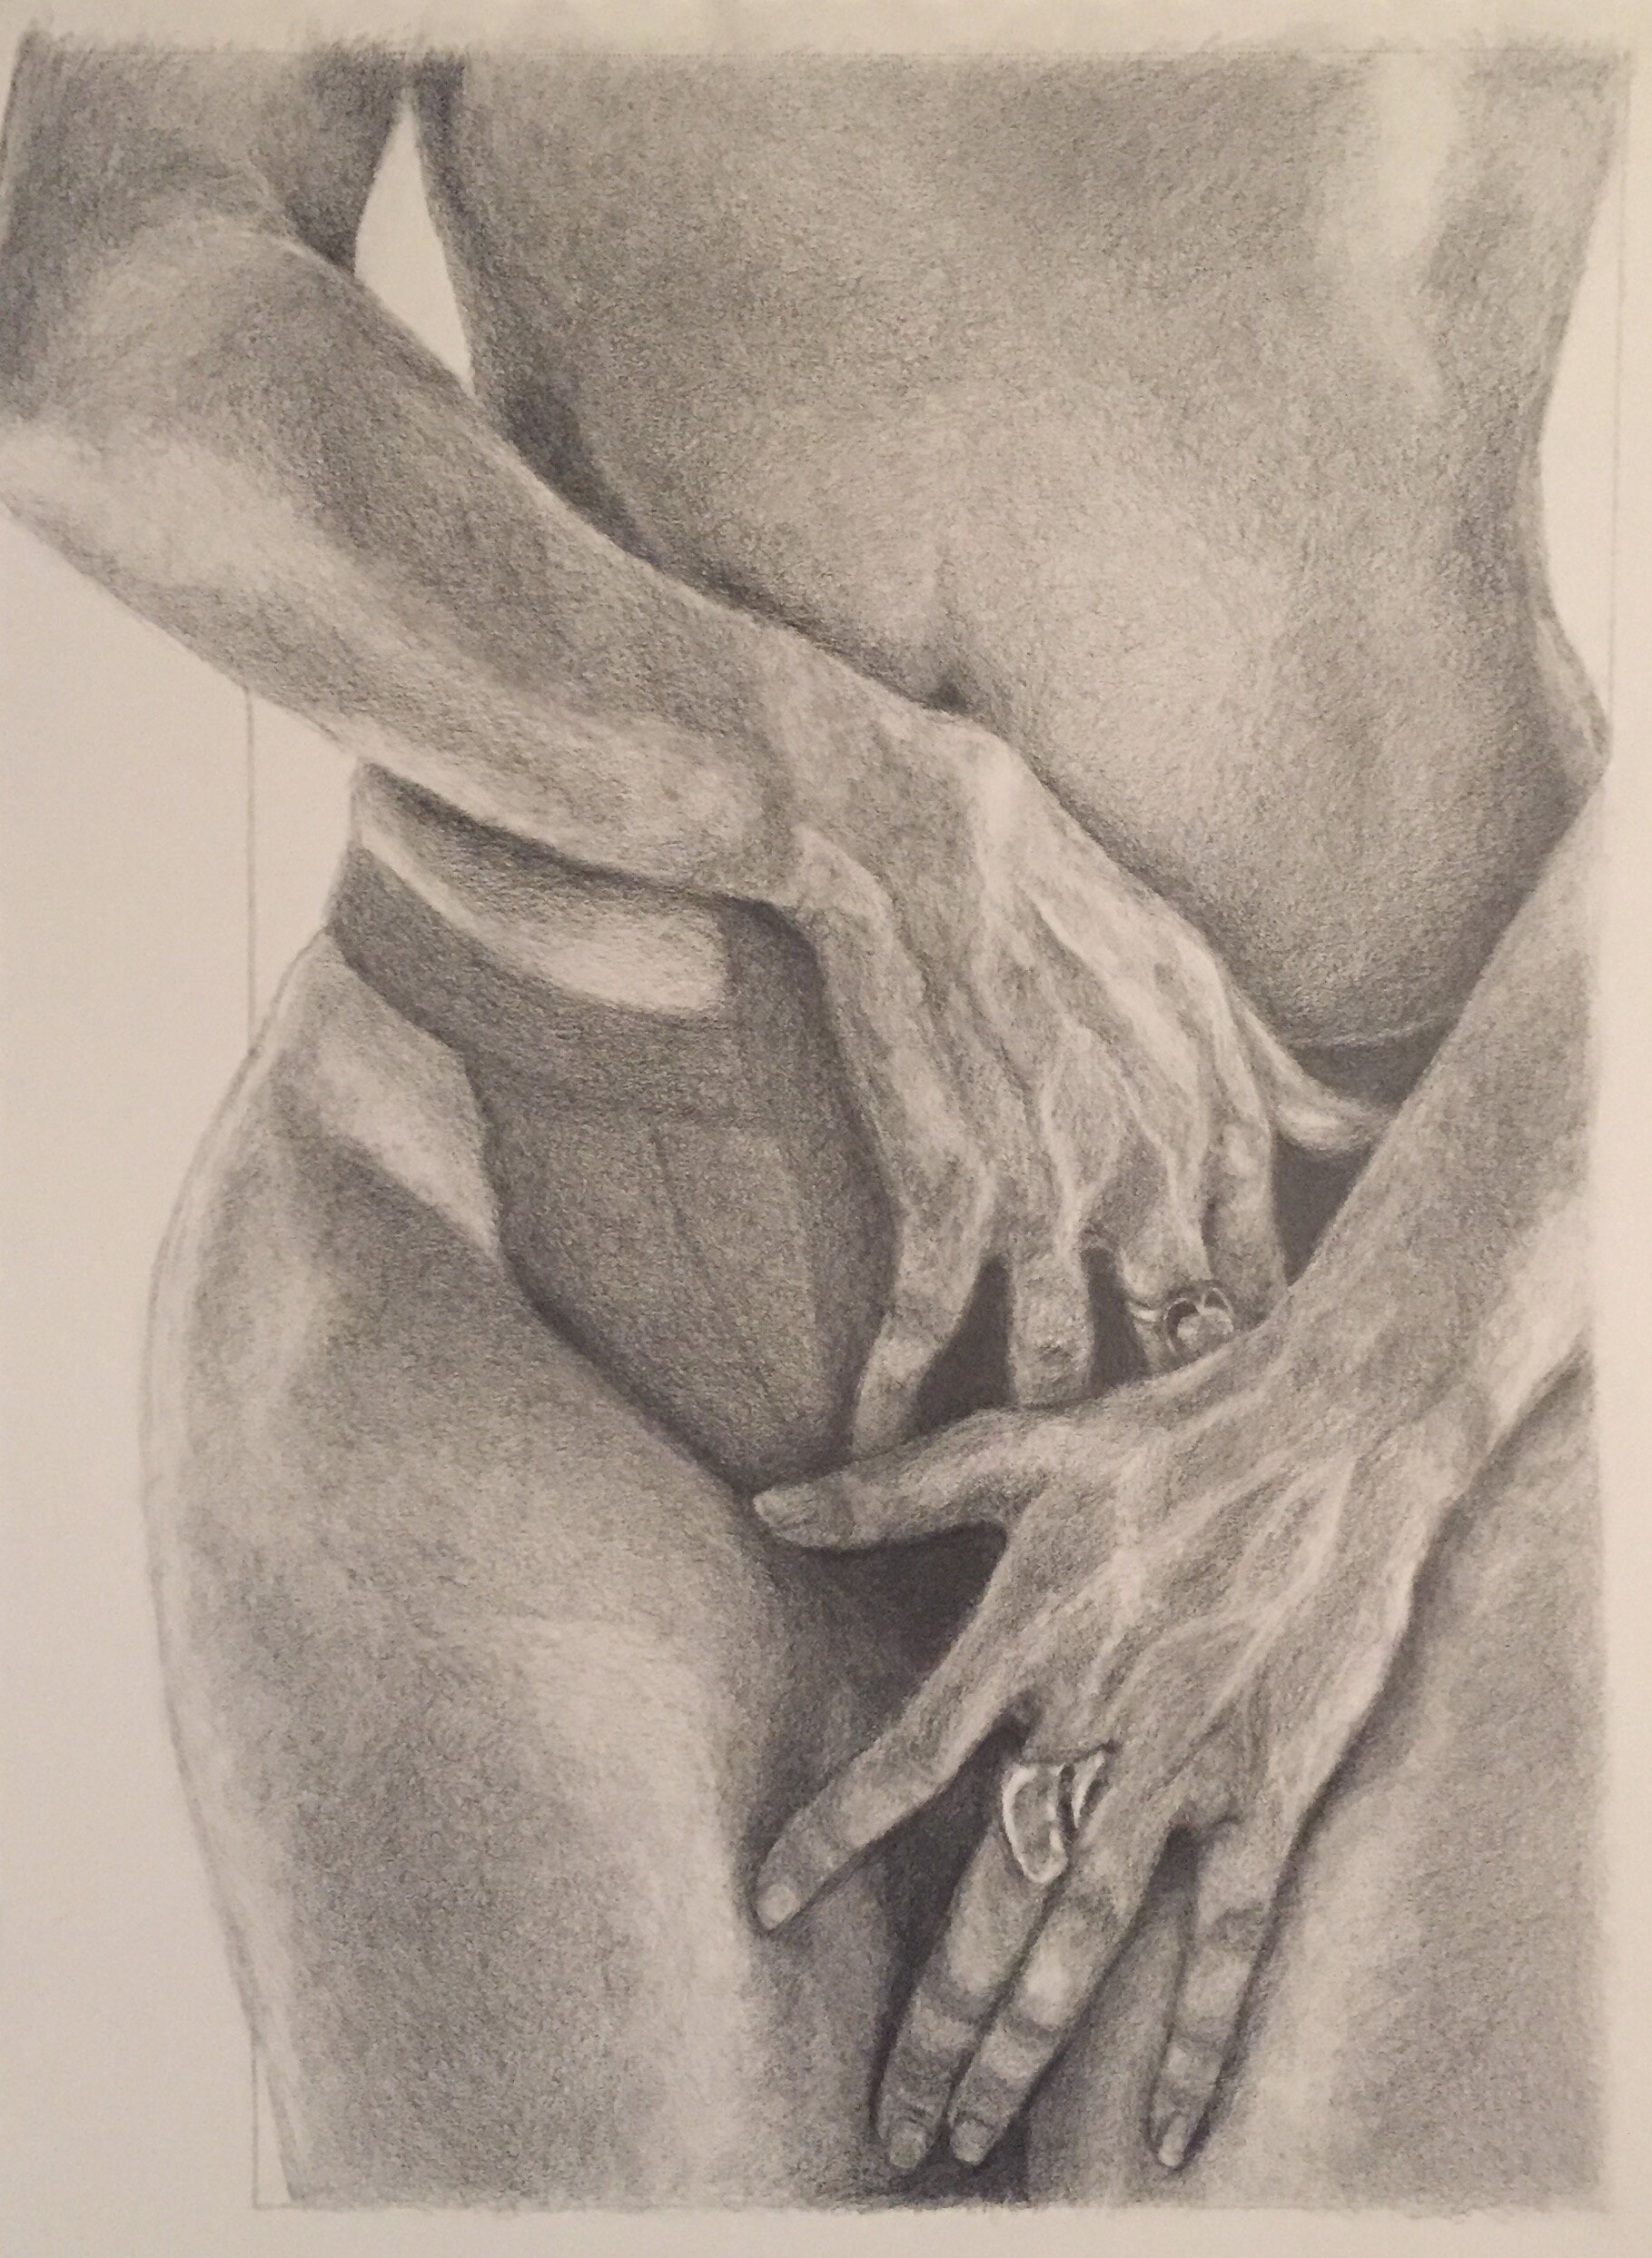 Almost Nude, 2020, 12.5x9.5" Graphite on paper